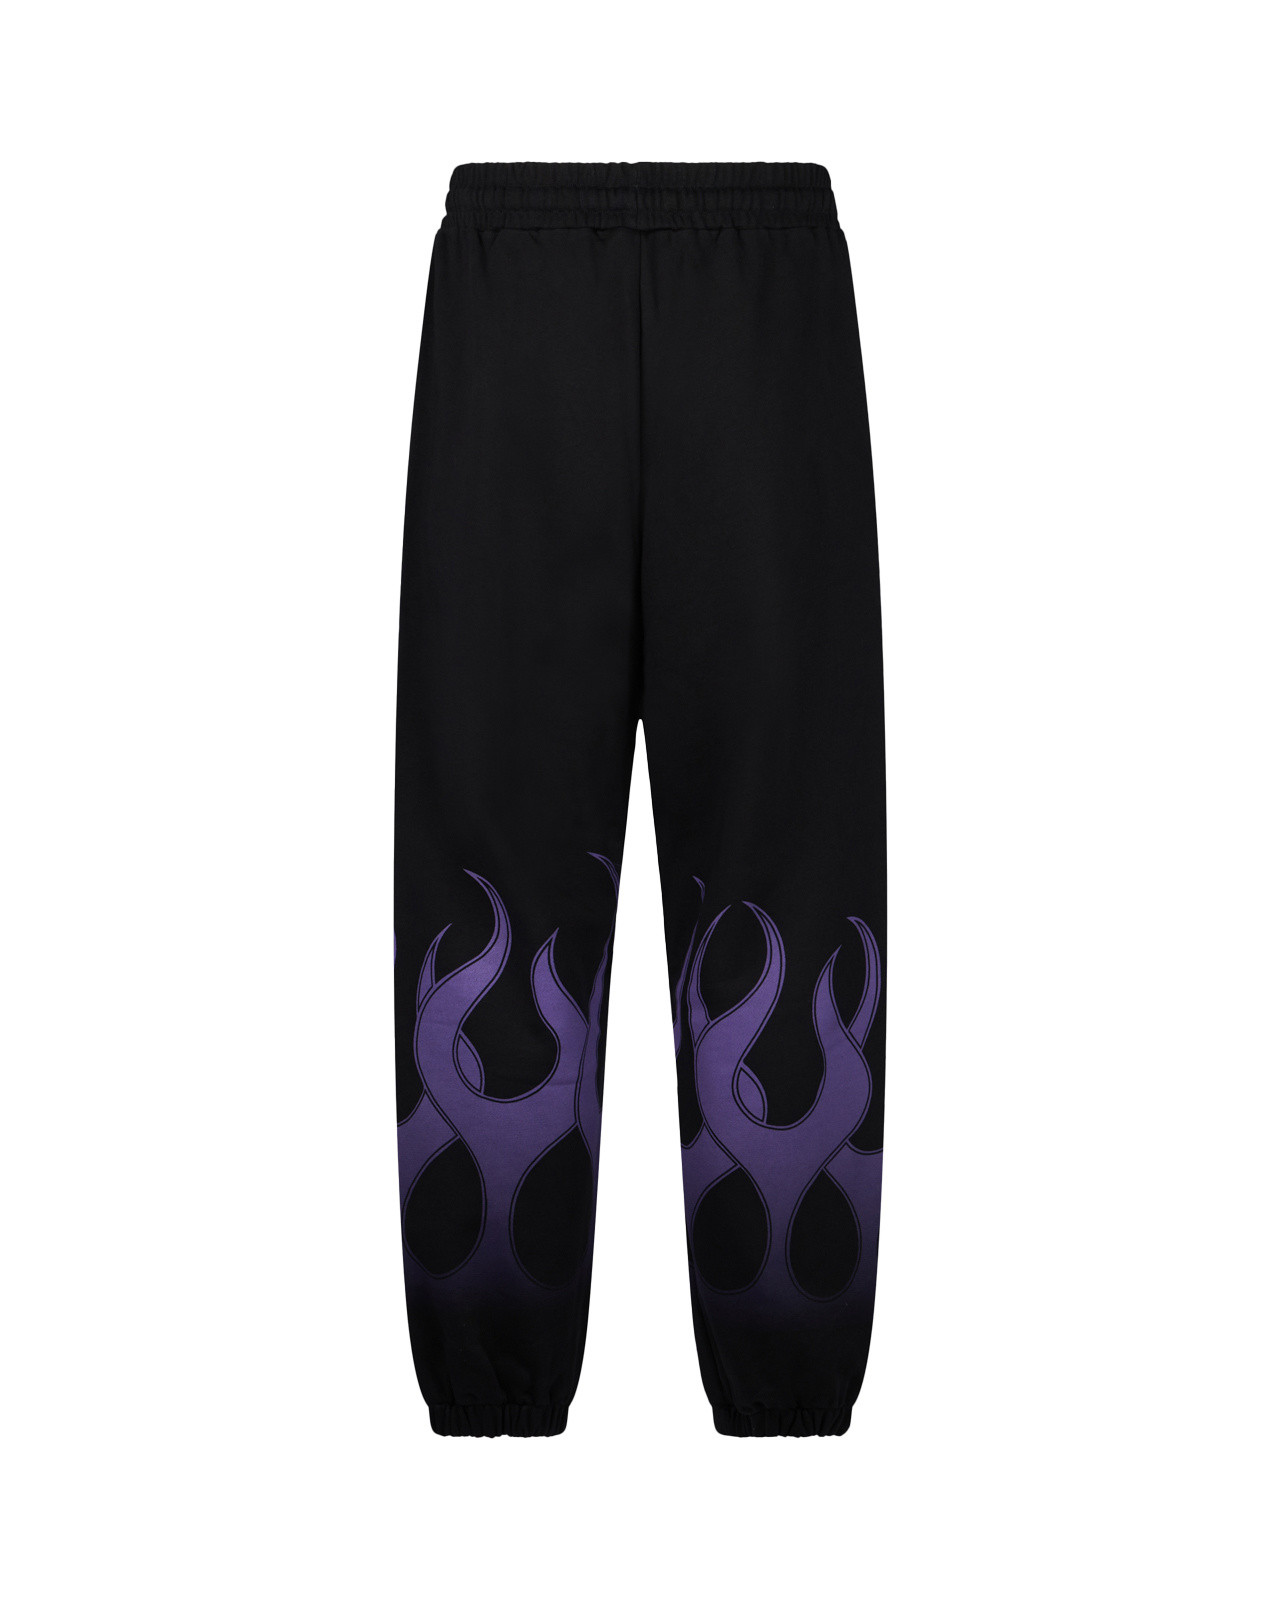 Vision of Super - Pants with racing flames, Black, large image number 1